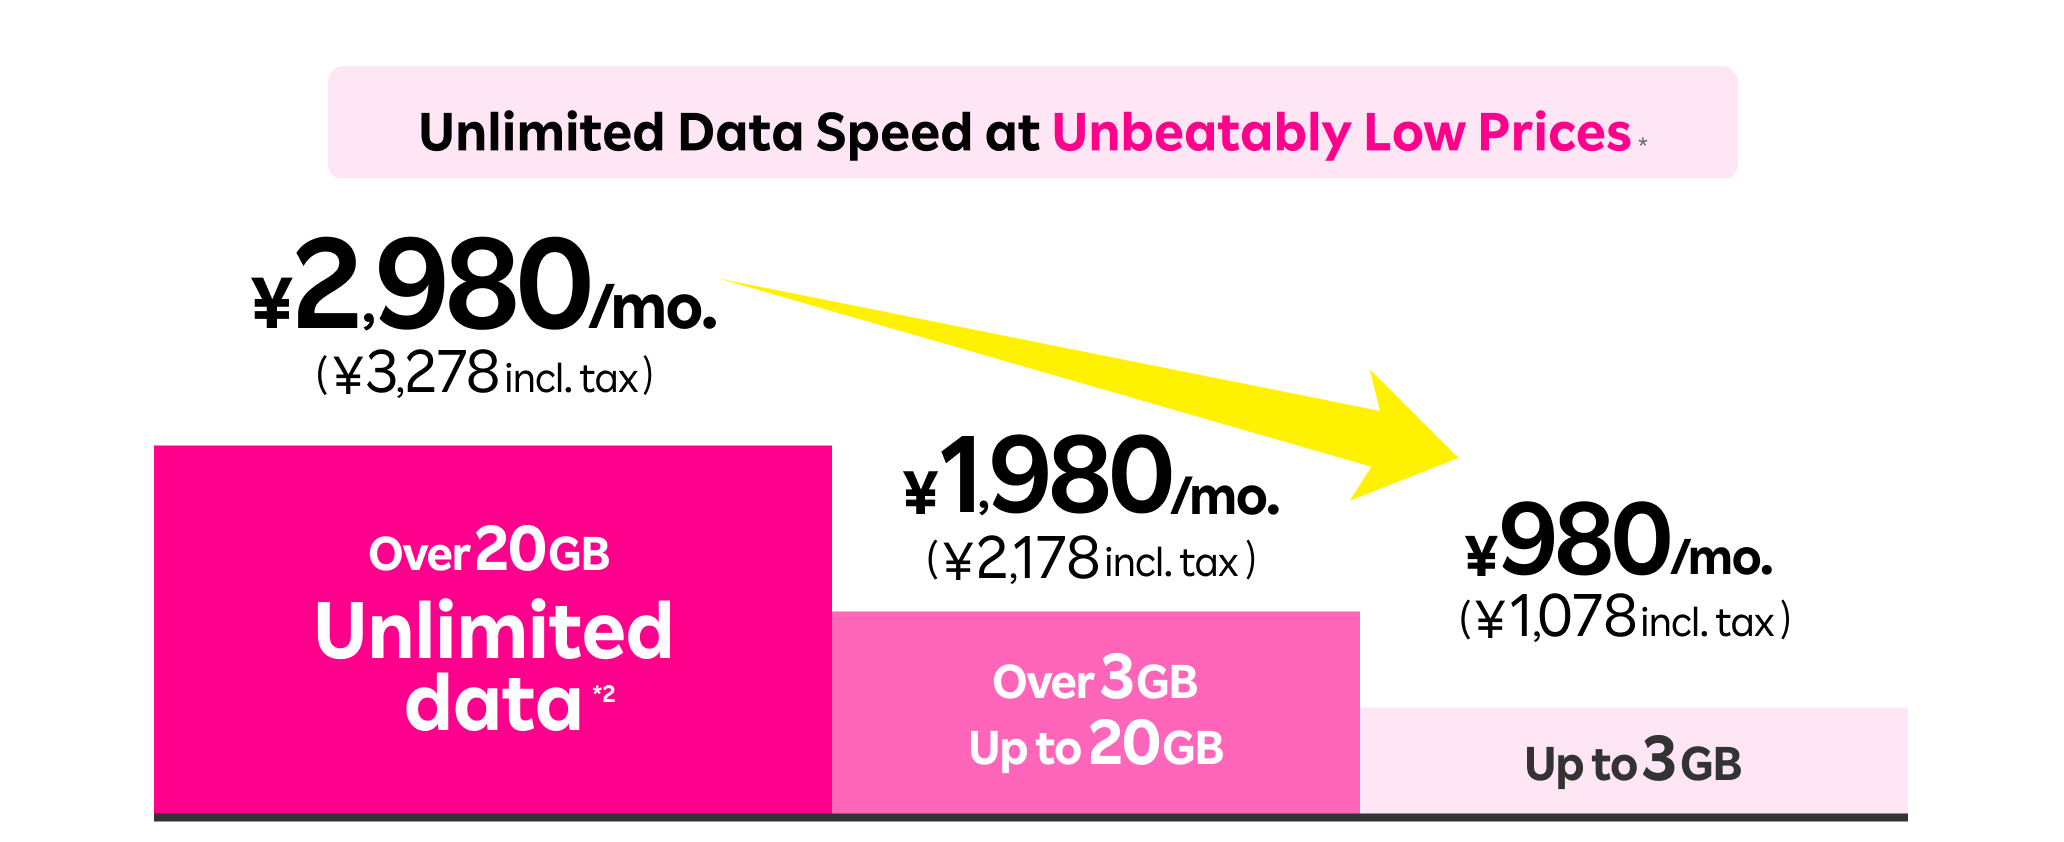 Unlimited data speed at unbeatably low prices even without the family discount applied, 980 yen/mo. (1,078 yen incl. tax) for up to 3GB or 2,980 yen/mo. (3,278 yen incl. tax) for unlimited high-speed data.